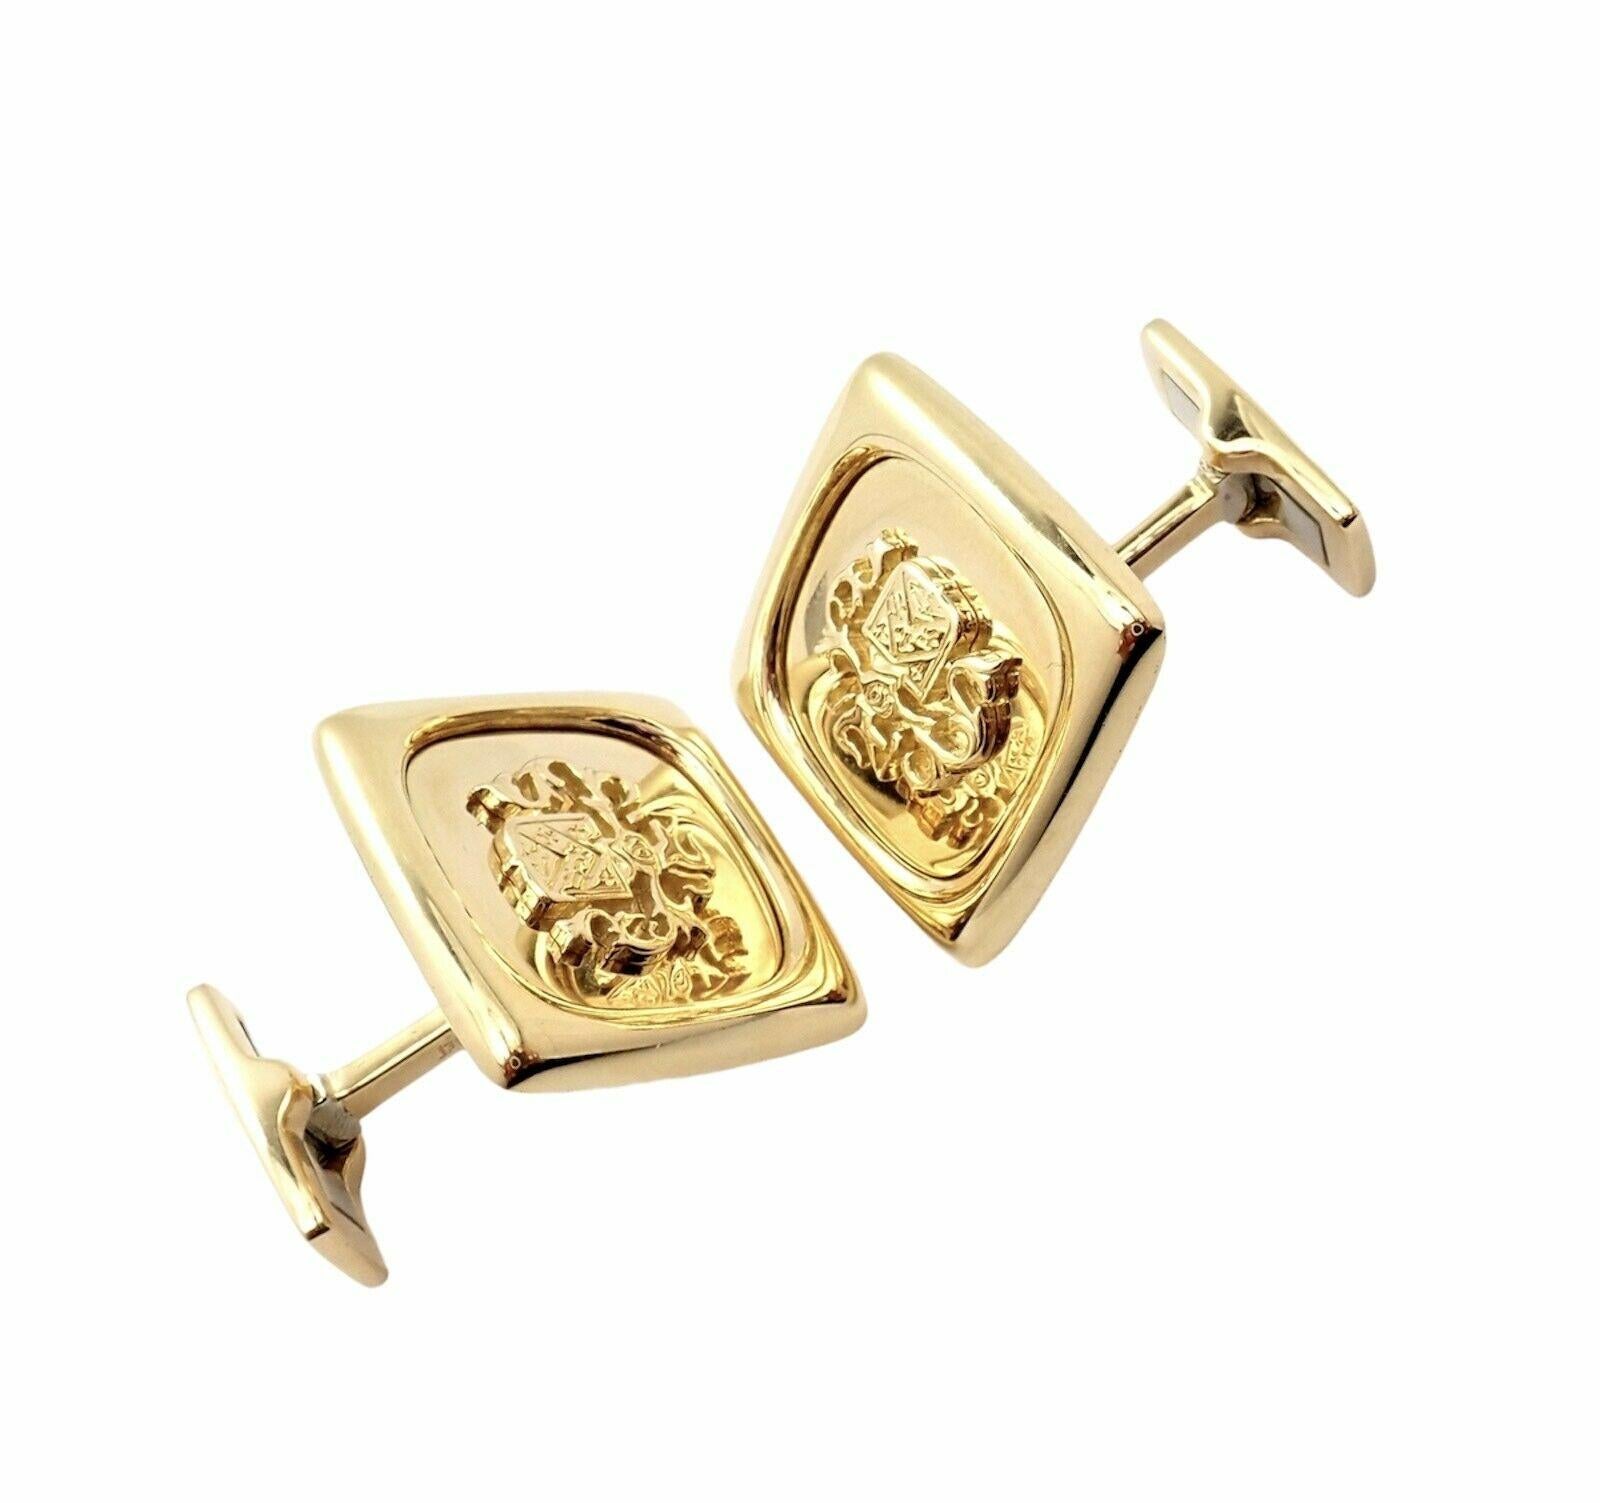 18k Yellow Gold Coat Of Arms Cufflinks by  Piaget. 
Details: 
Measurements: Front: 20mm x 20mm
Back: 8mm x 14mm
Weight: 27.1 grams
Stamped Hallmarks: Piaget 750
*Free Shipping within the United States*
YOUR PRICE: $5,000
Ti626othd